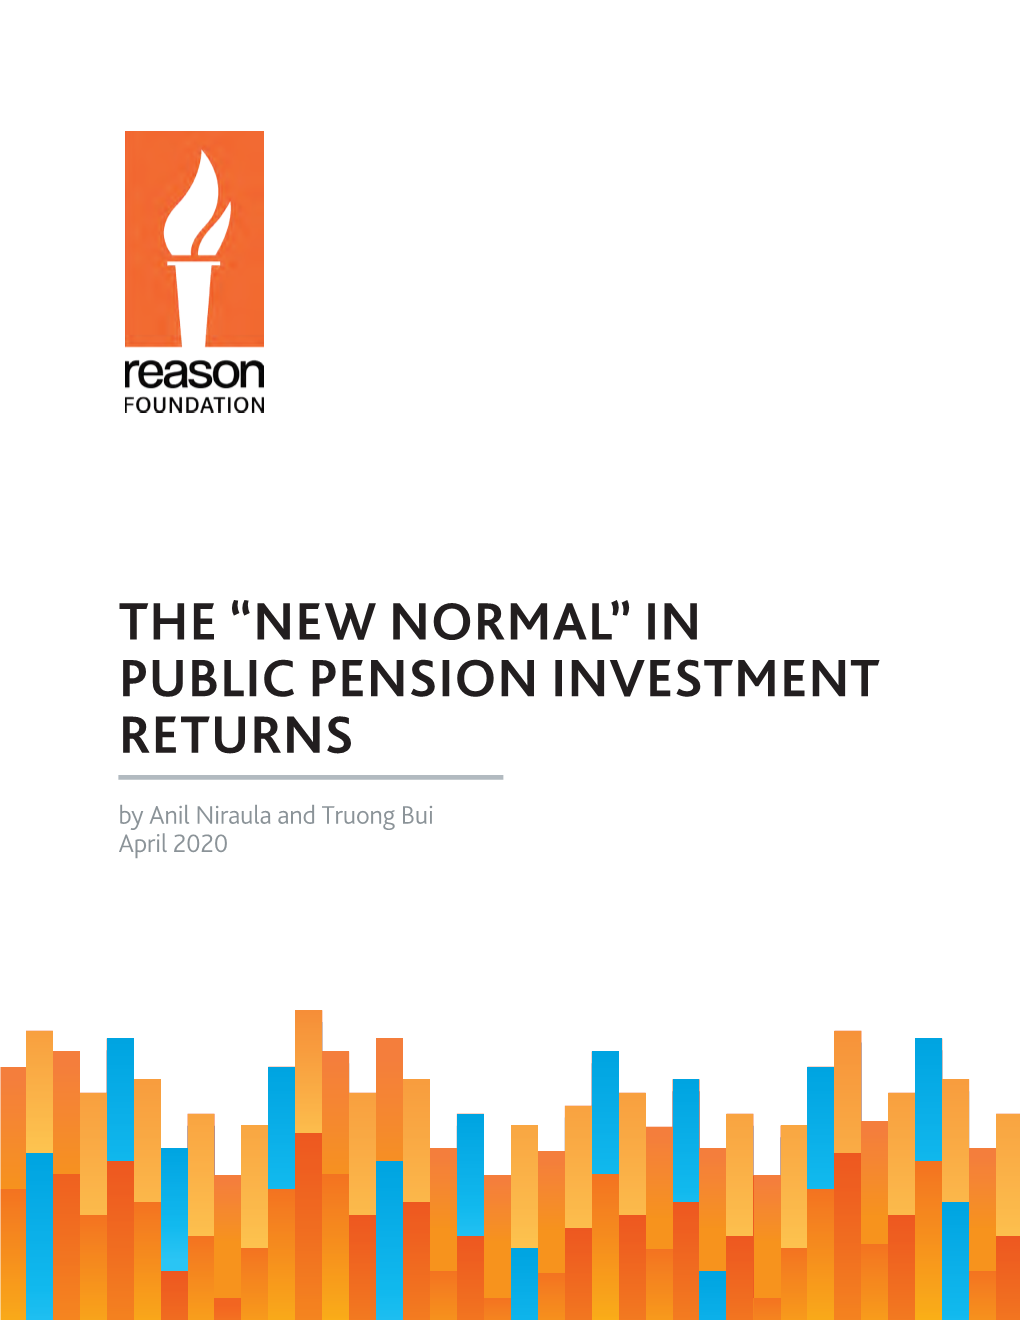 The New Normal in Public Pension Investment Returns